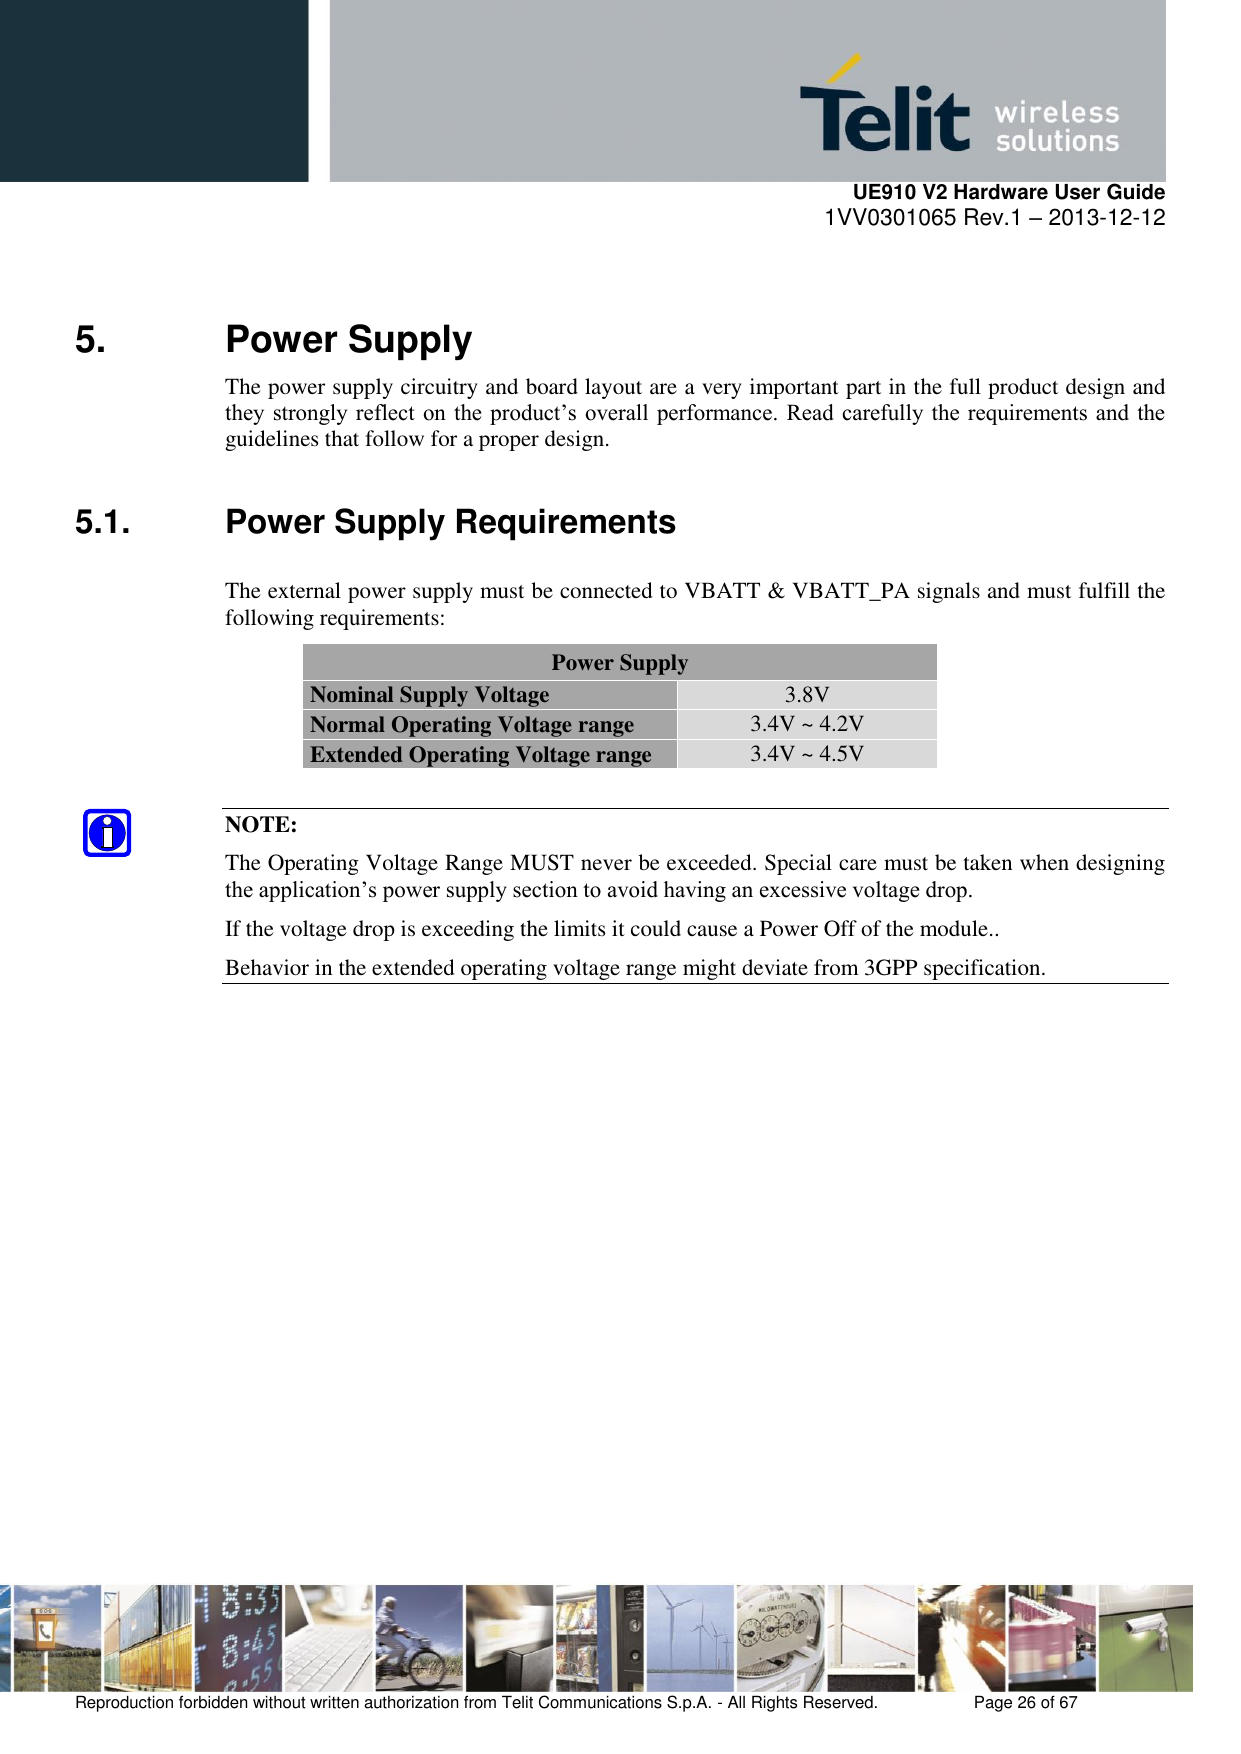     UE910 V2 Hardware User Guide 1VV0301065 Rev.1 – 2013-12-12  Reproduction forbidden without written authorization from Telit Communications S.p.A. - All Rights Reserved.    Page 26 of 67                                                     5.  Power Supply The power supply circuitry and board layout are a very important part in the full product design and they strongly  reflect  on the  product’s overall performance. Read carefully the  requirements and the guidelines that follow for a proper design. 5.1.  Power Supply Requirements The external power supply must be connected to VBATT &amp; VBATT_PA signals and must fulfill the following requirements: Power Supply Nominal Supply Voltage 3.8V Normal Operating Voltage range 3.4V ~ 4.2V Extended Operating Voltage range 3.4V ~ 4.5V  NOTE: The Operating Voltage Range MUST never be exceeded. Special care must be taken when designing the application’s power supply section to avoid having an excessive voltage drop. If the voltage drop is exceeding the limits it could cause a Power Off of the module.. Behavior in the extended operating voltage range might deviate from 3GPP specification.             